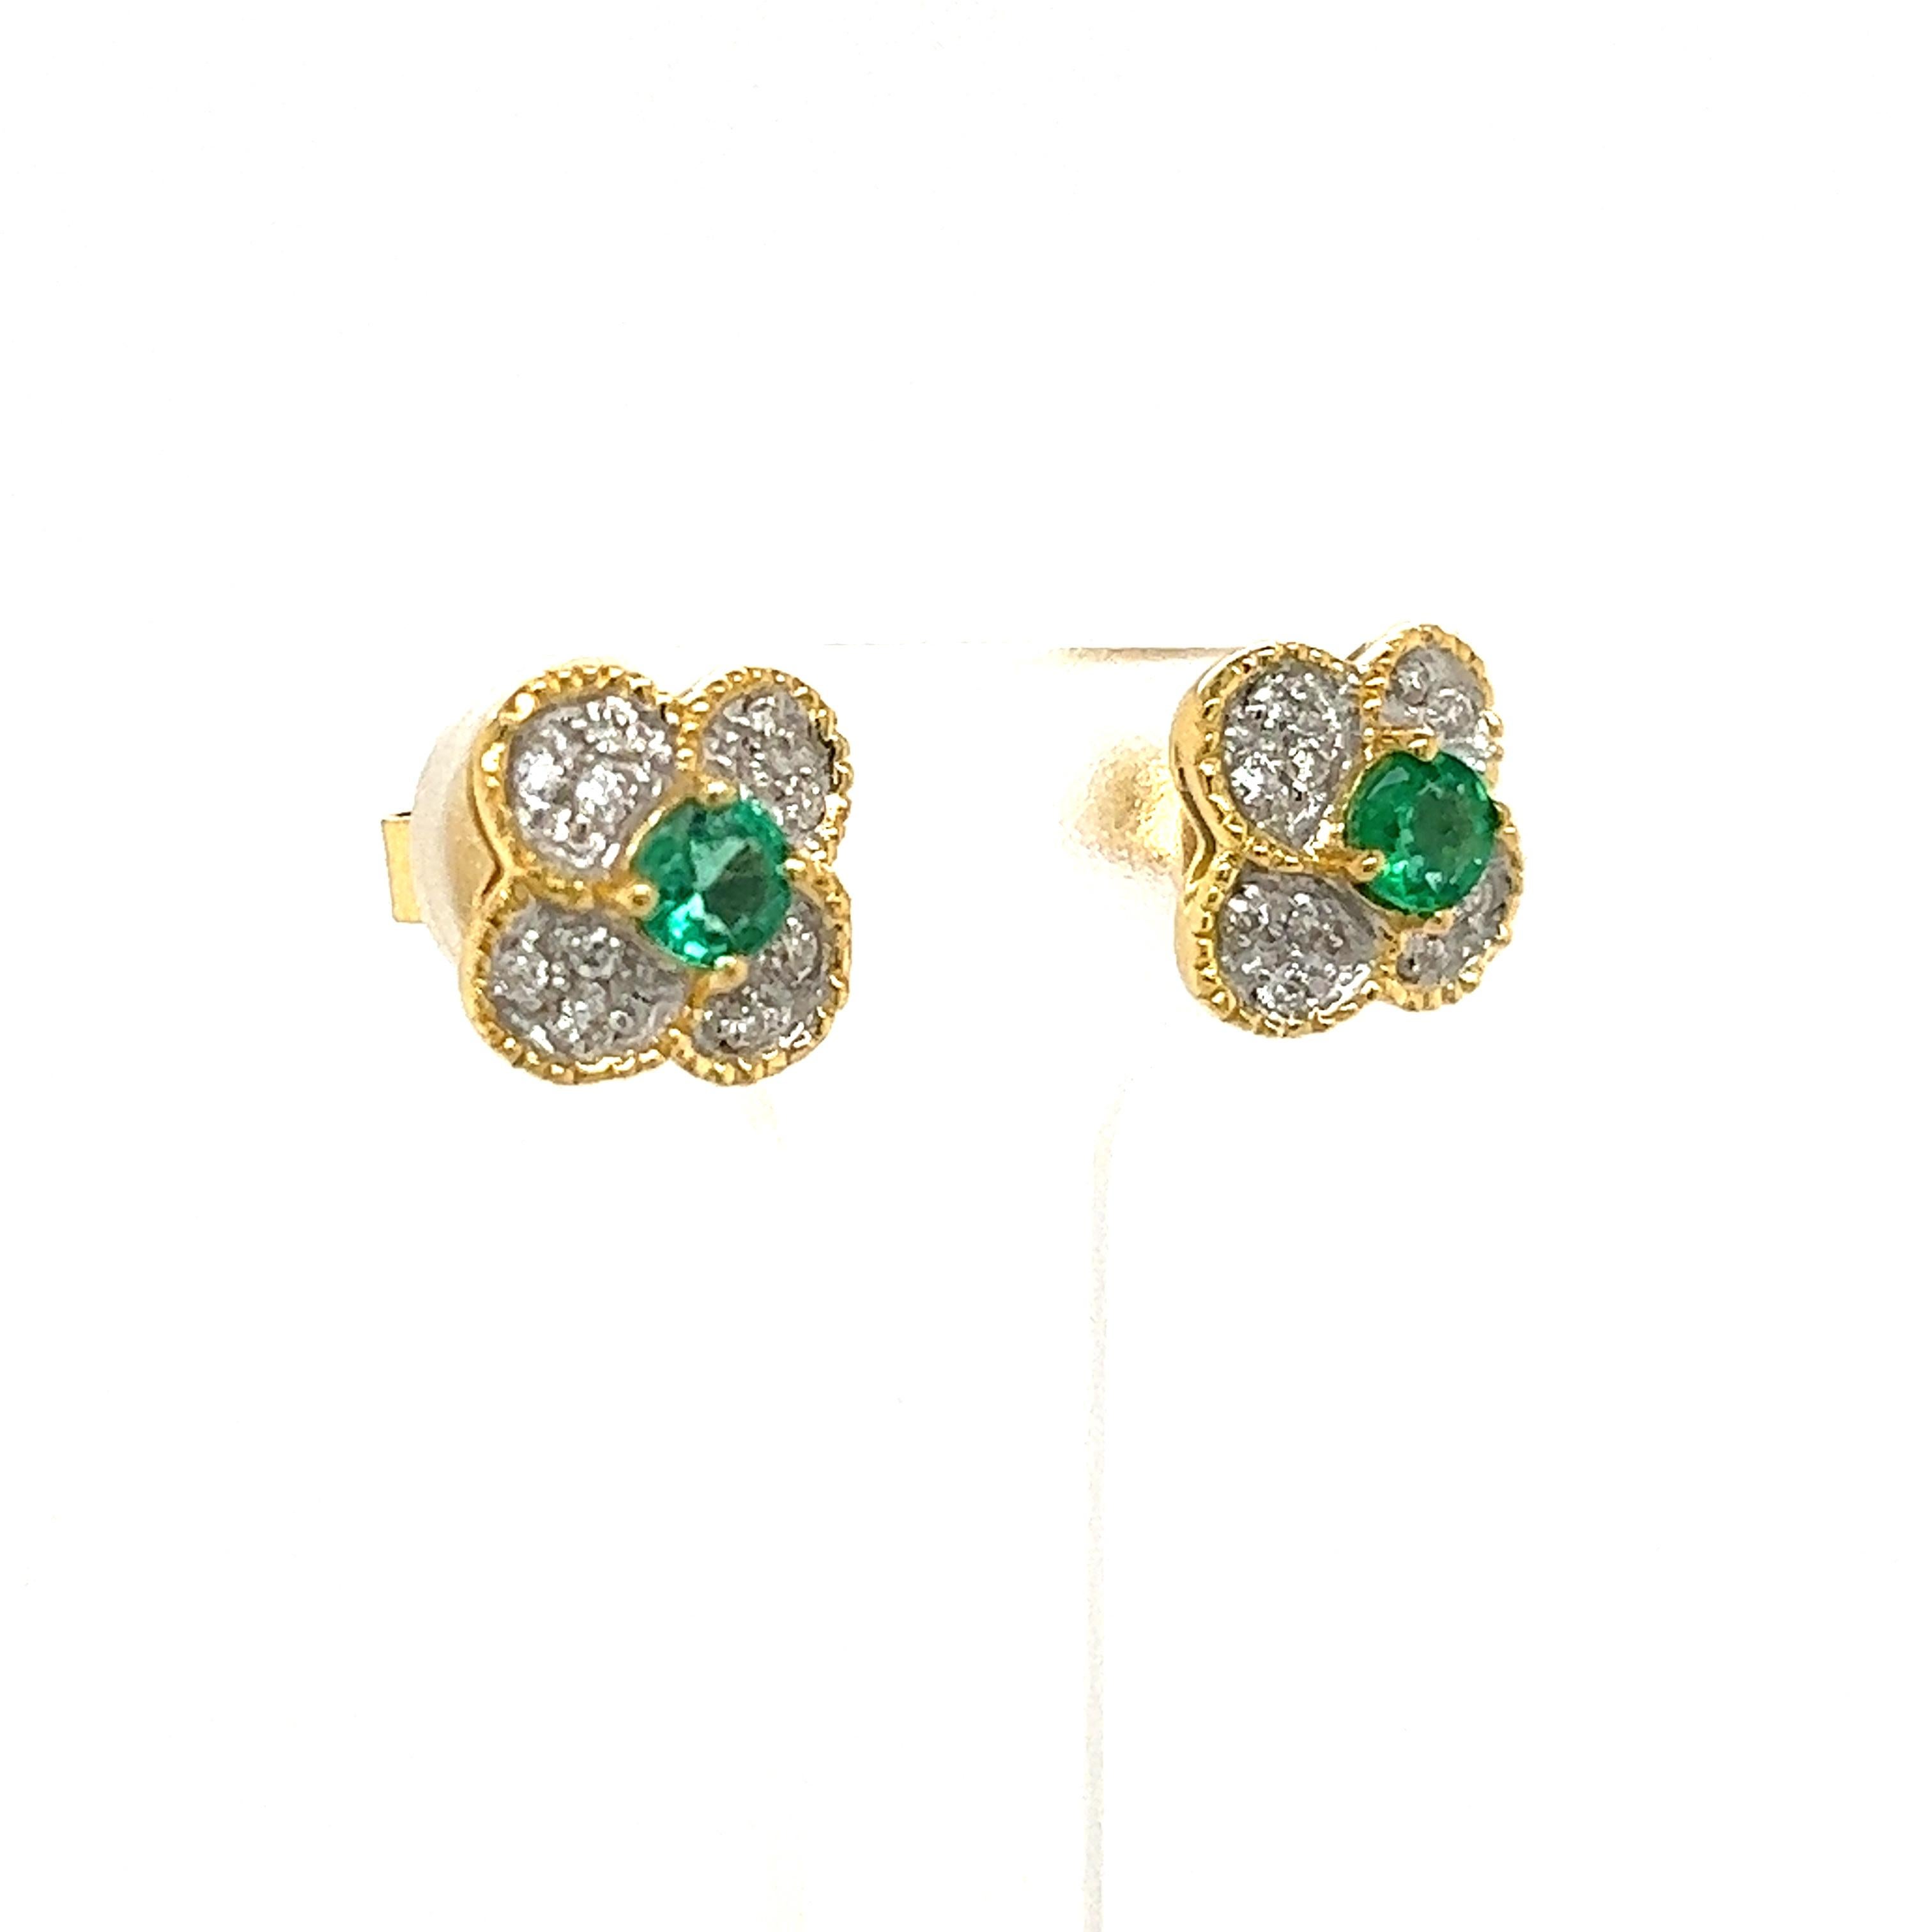 Pretty, dainty earrings with .40ct emeralds total weight and .18ct total weight of white diamonds, G color and VS clarity. A cute spin on everyday earrings set in 14k white and yellow gold.